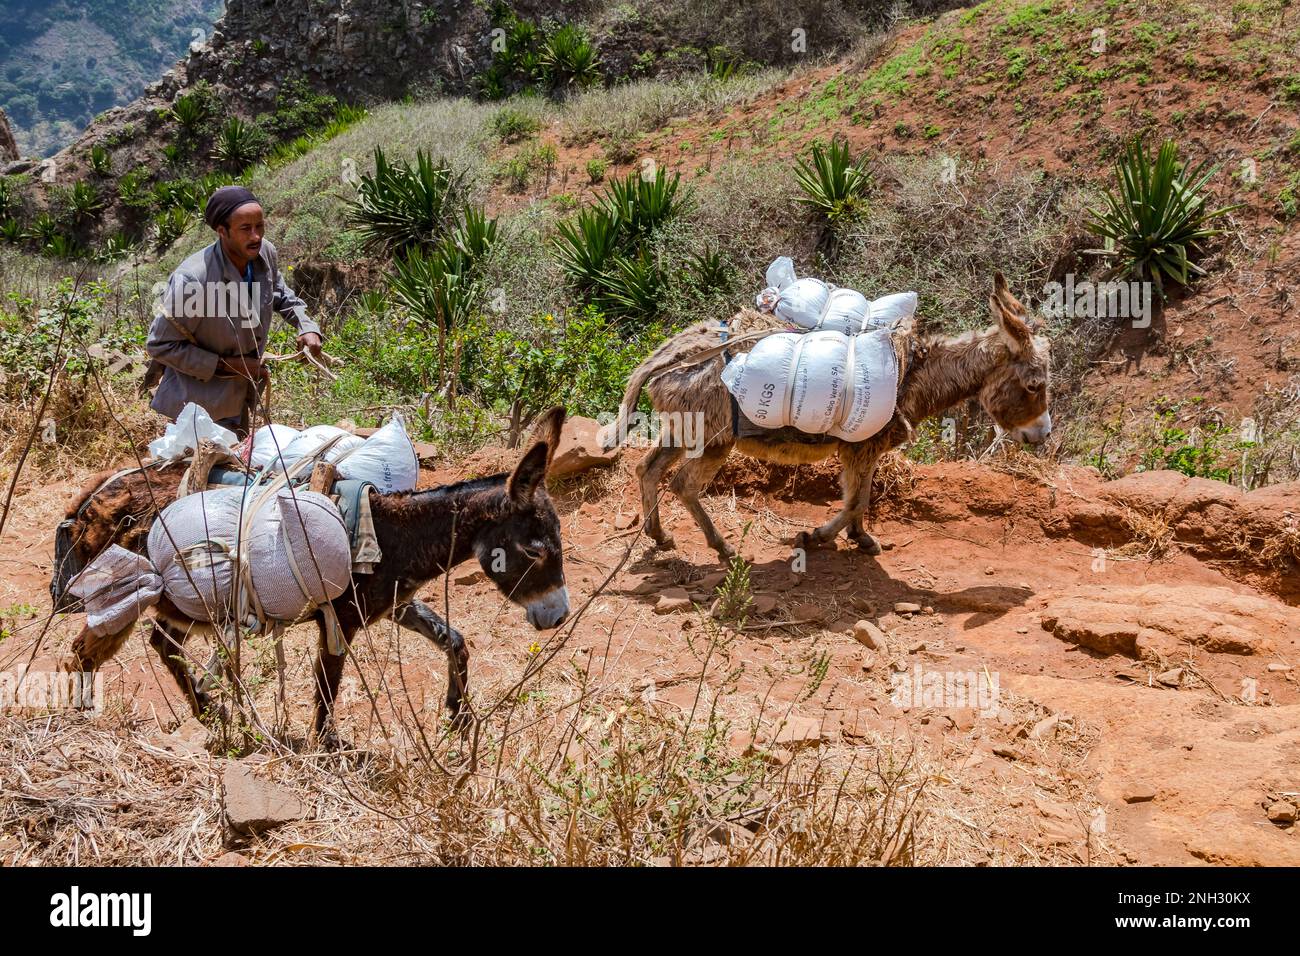 A man with donkeys carrying sacks on a dusty path, Santiago Island, Cape Verde Islands in the Atlantic Ocean Stock Photo